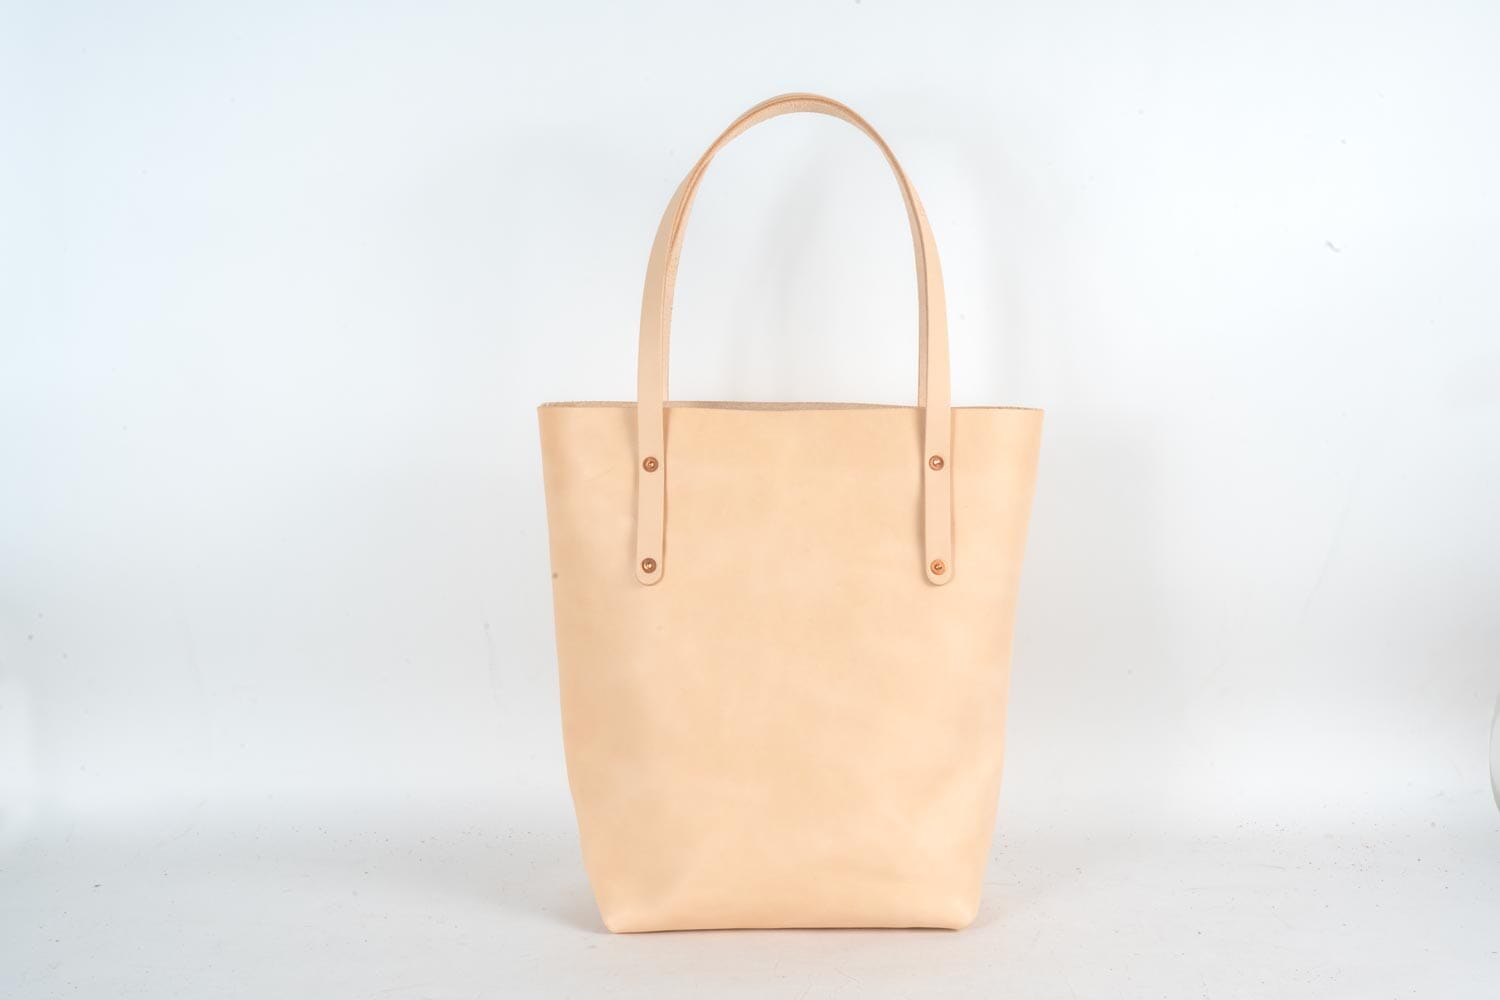 AVERY LEATHER TOTE BAG - SLIM LARGE - NATURAL VEG TAN (READY TO SHIP)